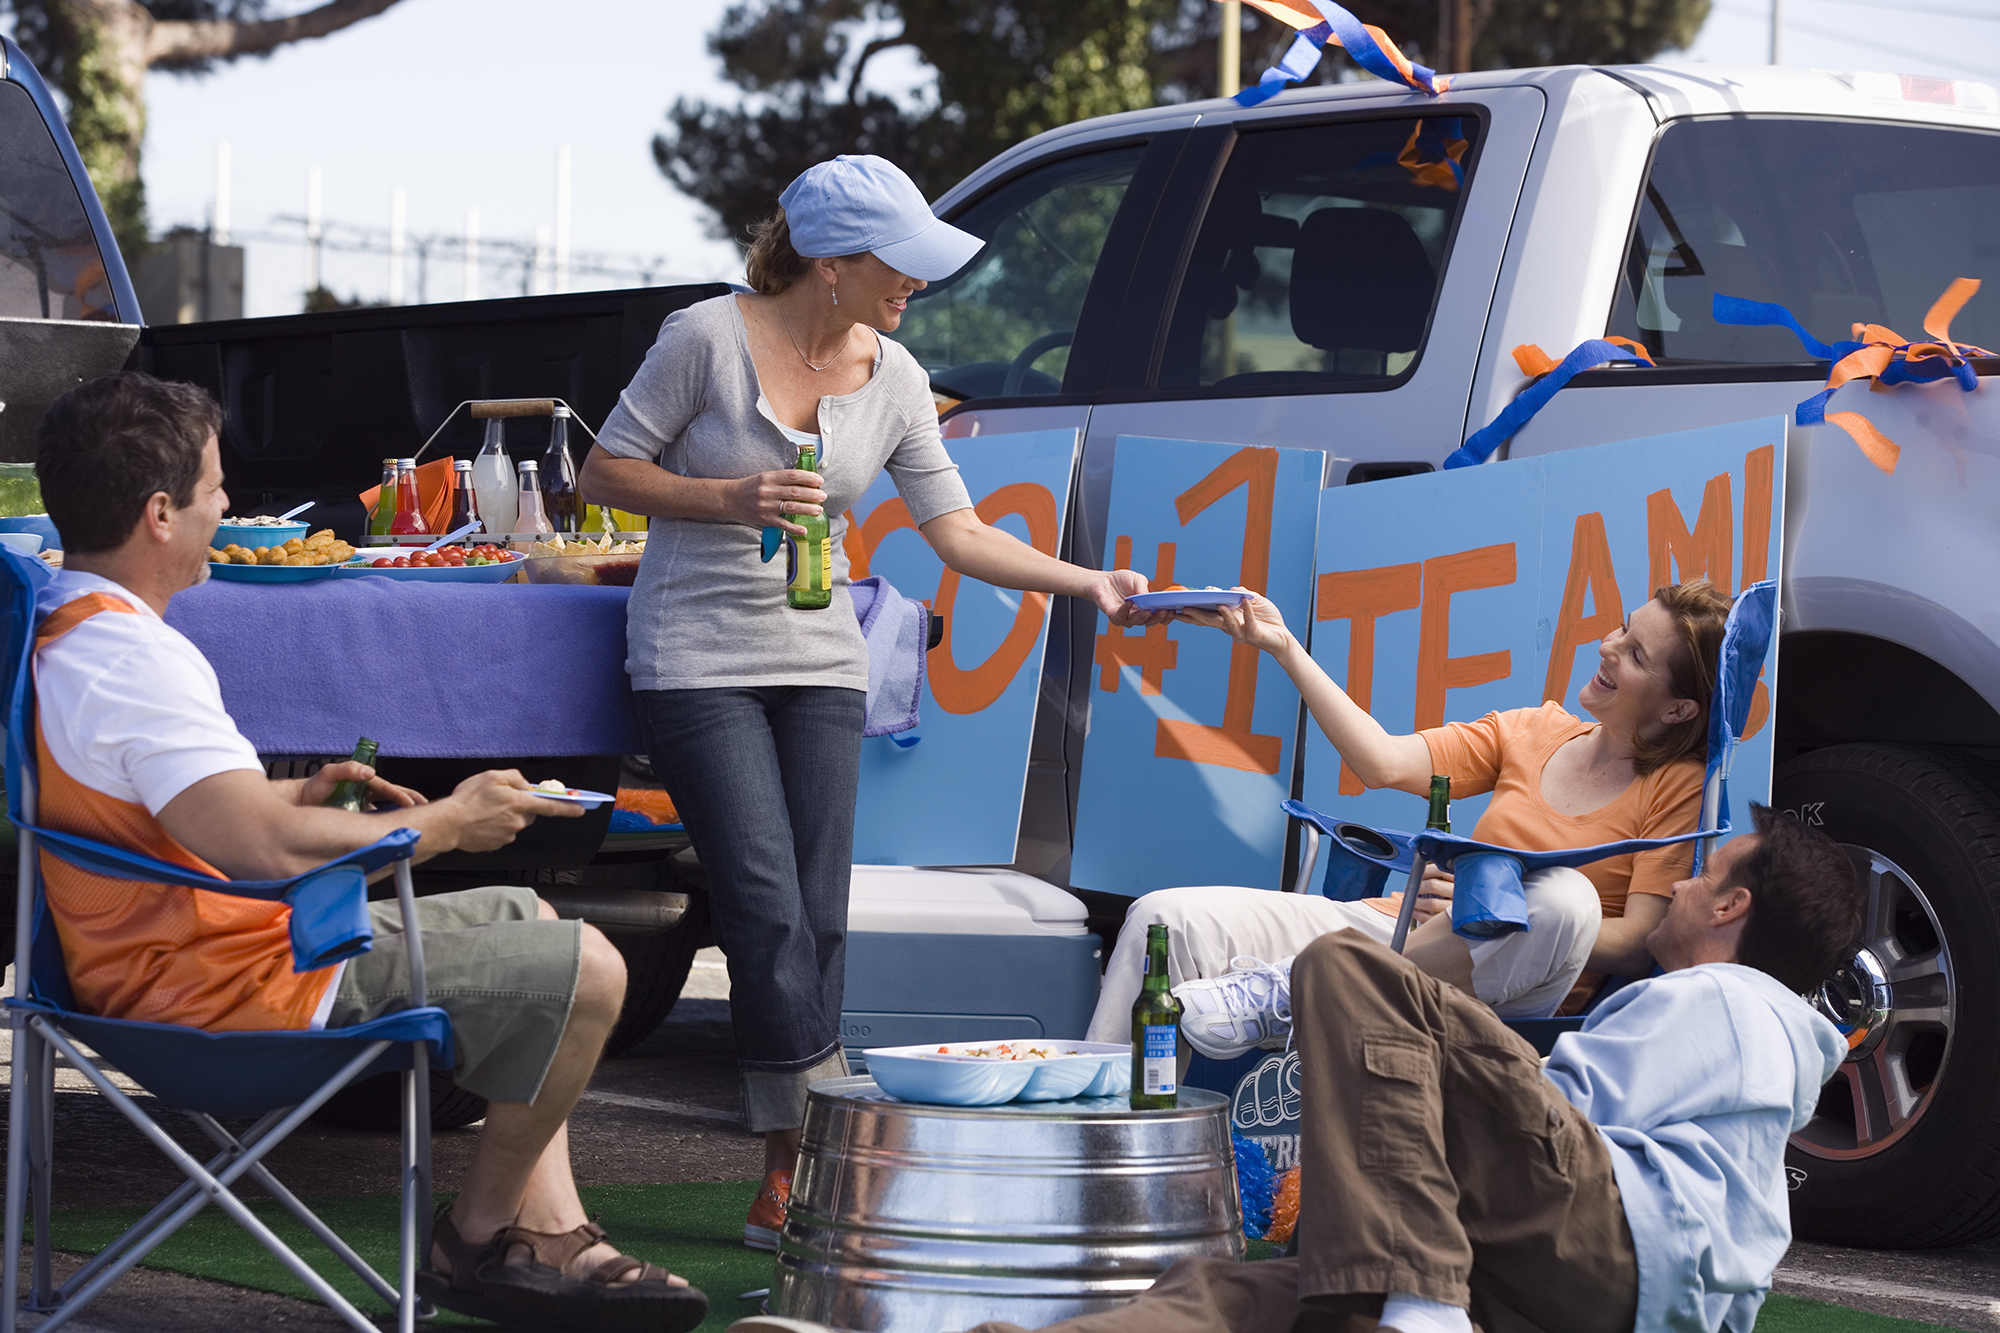 Rollicking tailgating party